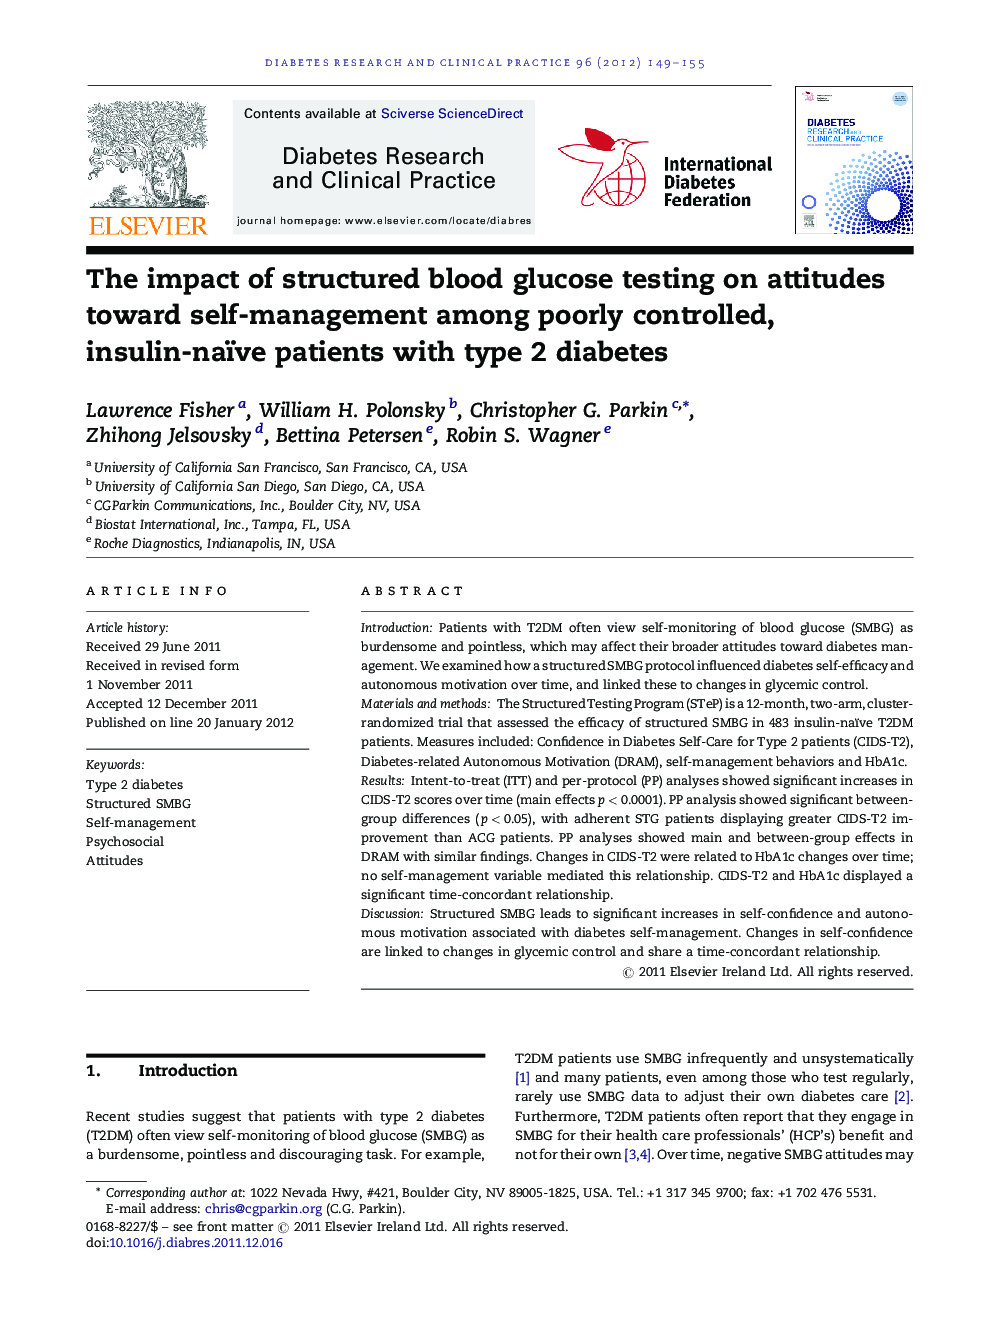 The impact of structured blood glucose testing on attitudes toward self-management among poorly controlled, insulin-naïve patients with type 2 diabetes